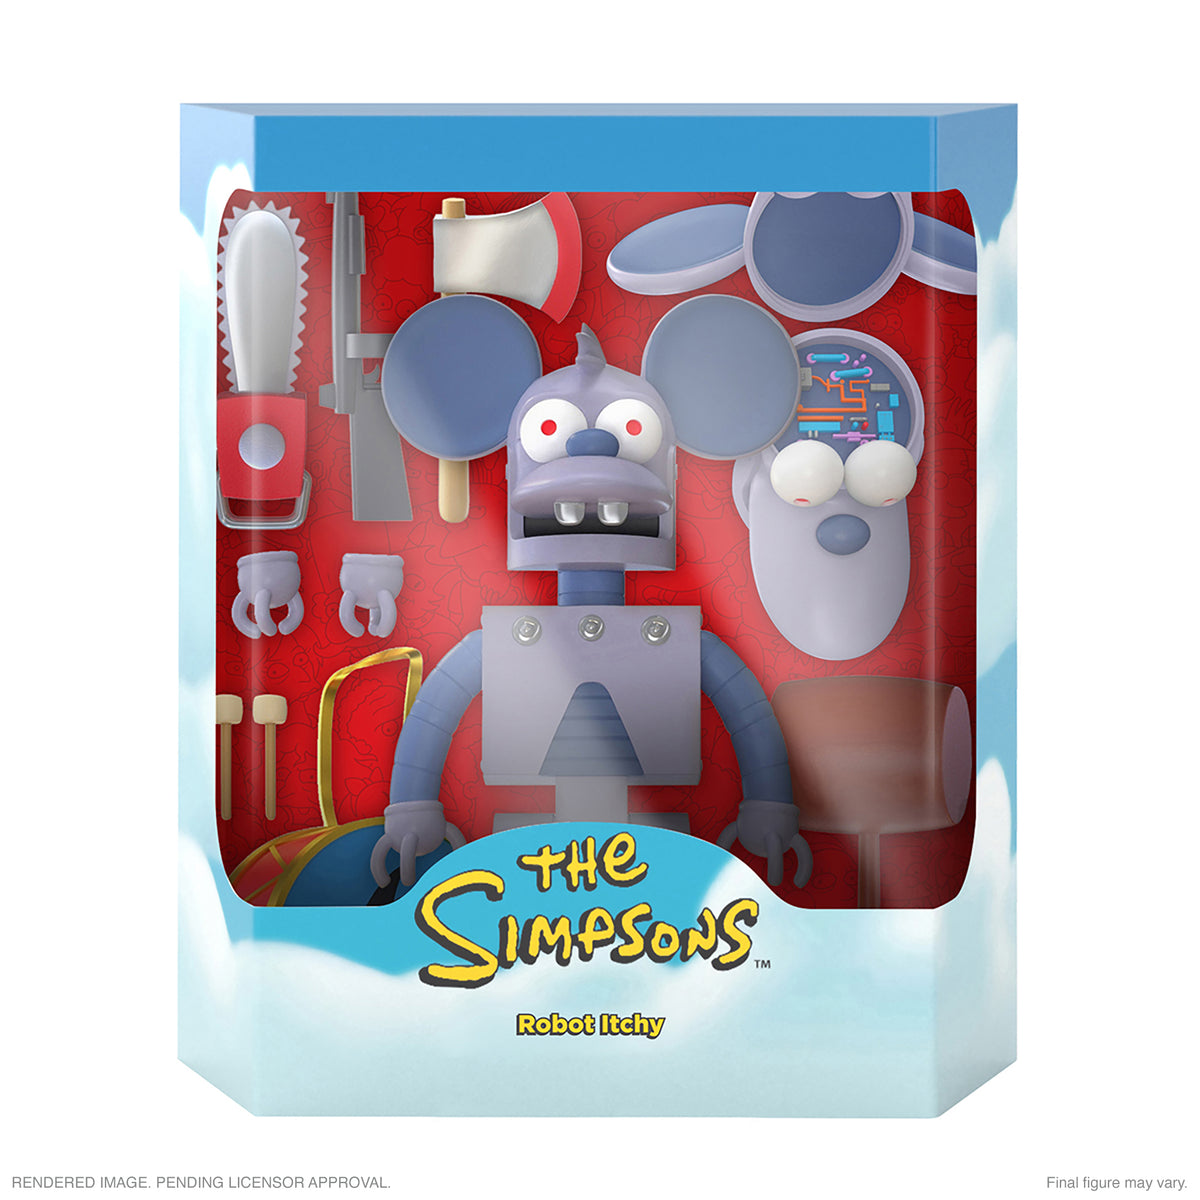 The Simpsons Robot Itchy Ultimate Edition by Super7